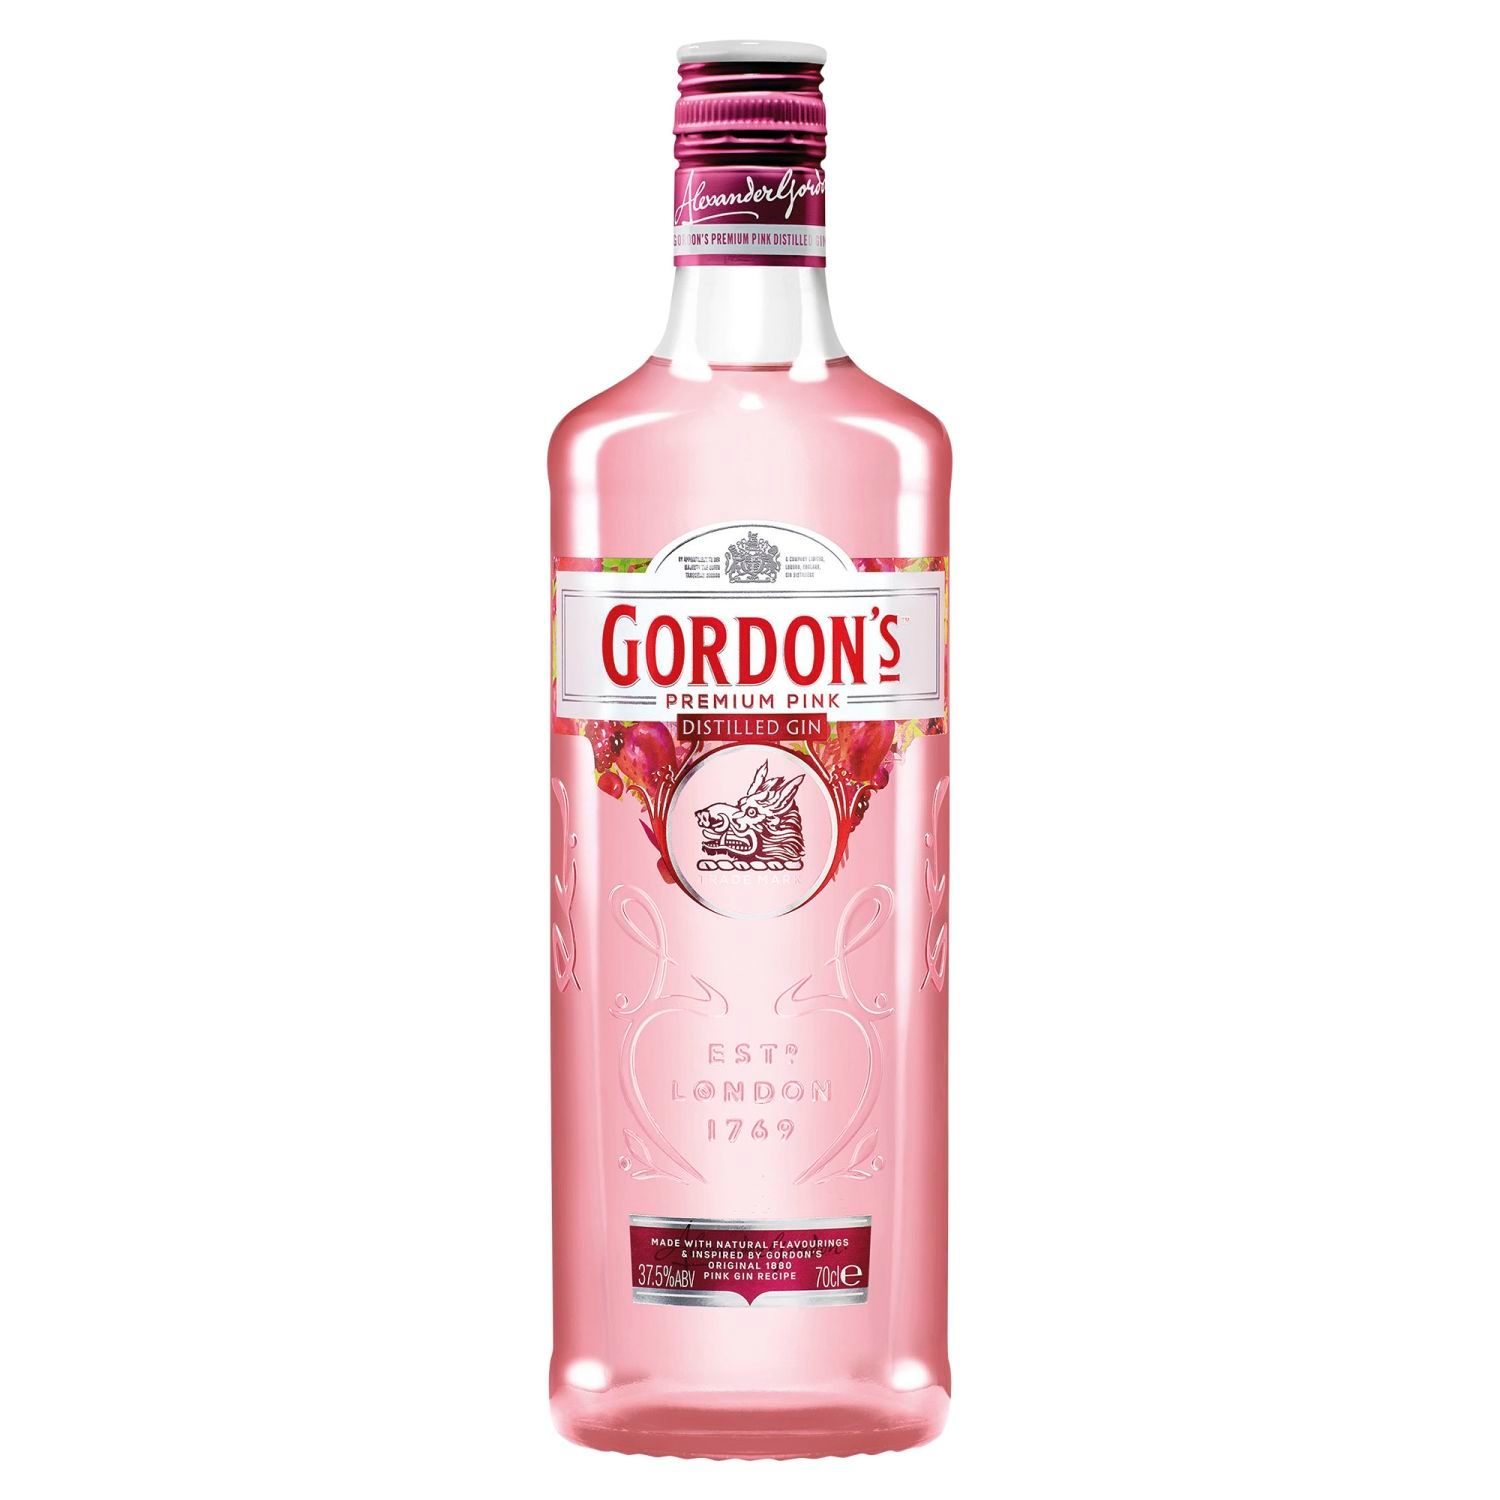 Inspired by an original Gordon’s recipe from the 1880s, the pink gin is perfectly crafted to balance the refreshing taste of Gordon’s with the natural sweetness of raspberries and strawberries, with the tang of redcurrant served up in a unique blushing tone. Made using only natural fruit flavours to guarantee the highest quality real berry taste.<br /> <br />Alcohol Volume: 37.50%<br /><br />Pack Format: Bottle<br /><br />Standard Drinks: 21</br /><br />Pack Type: Bottle<br /><br />Country of Origin: England<br />